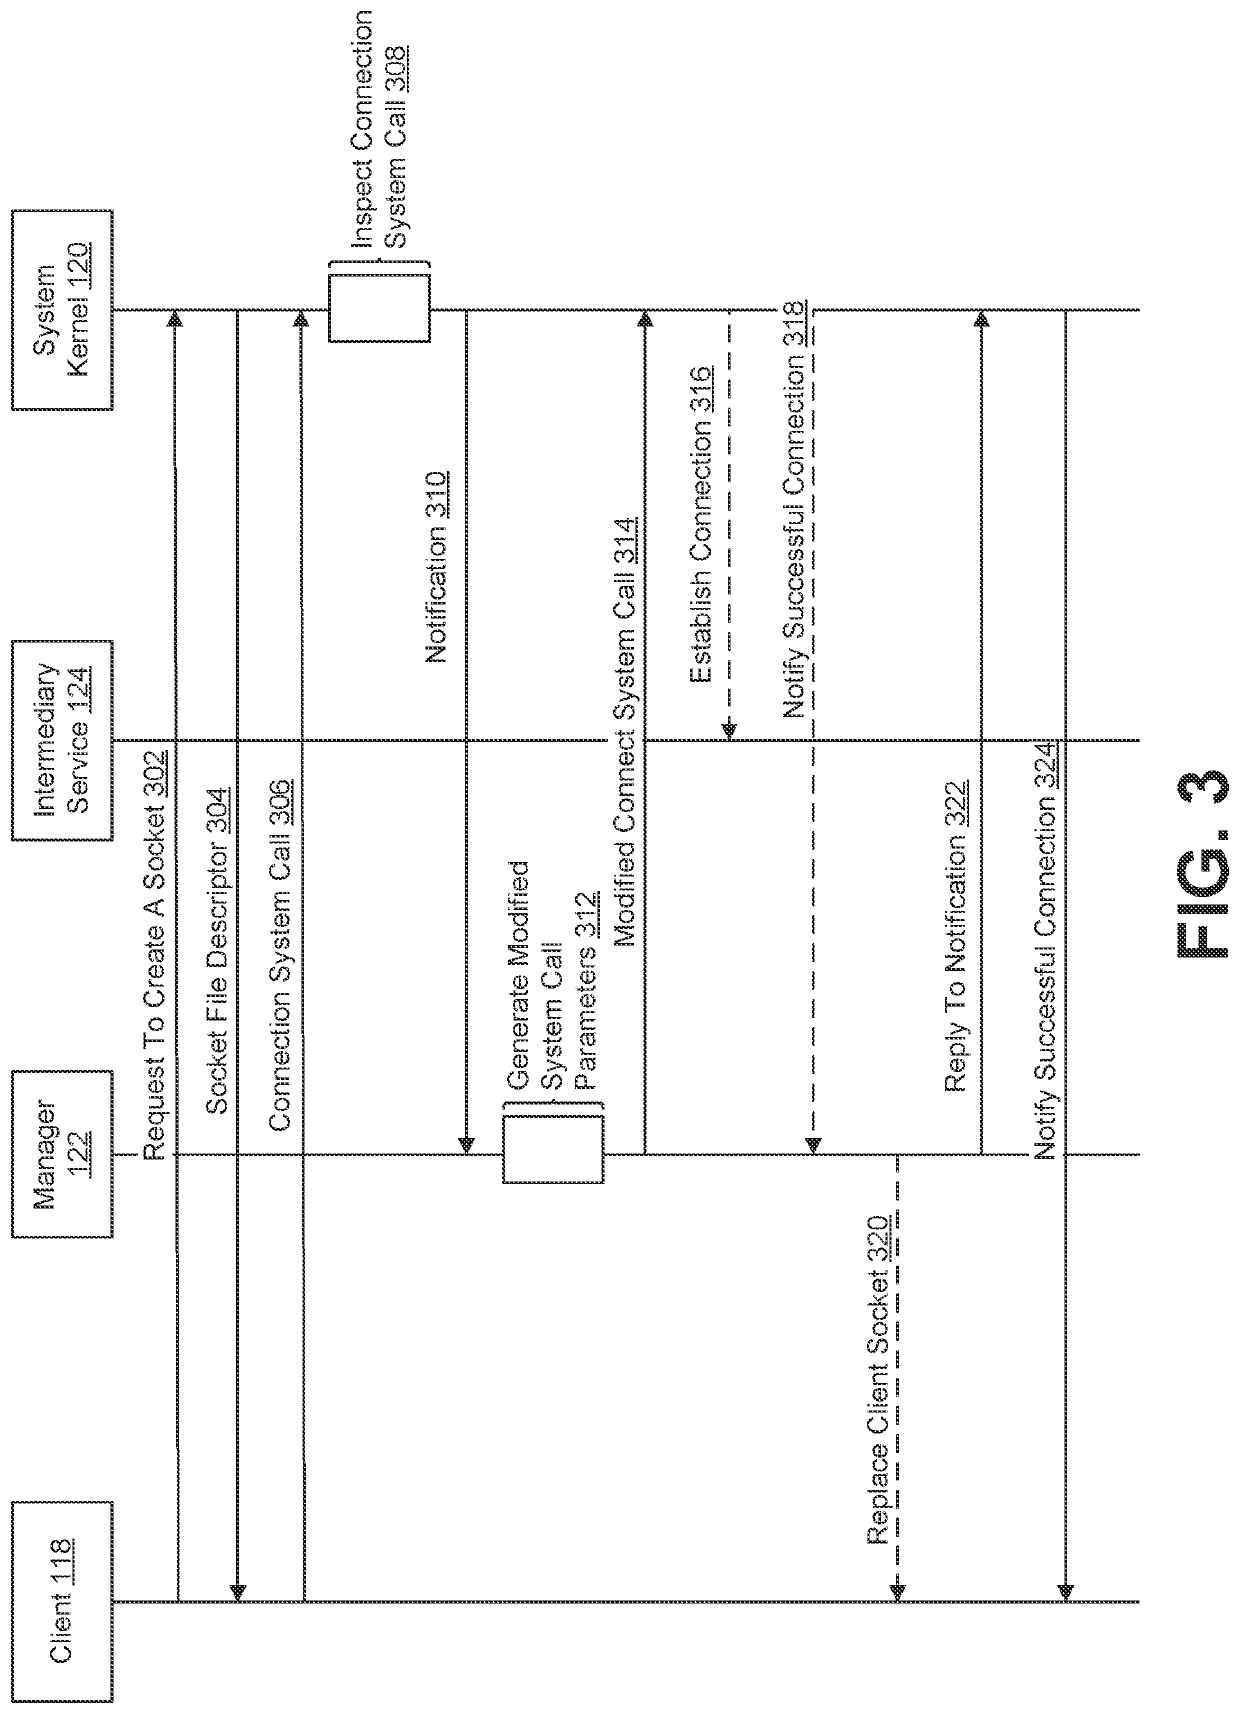 Networking-related system call interception and modification